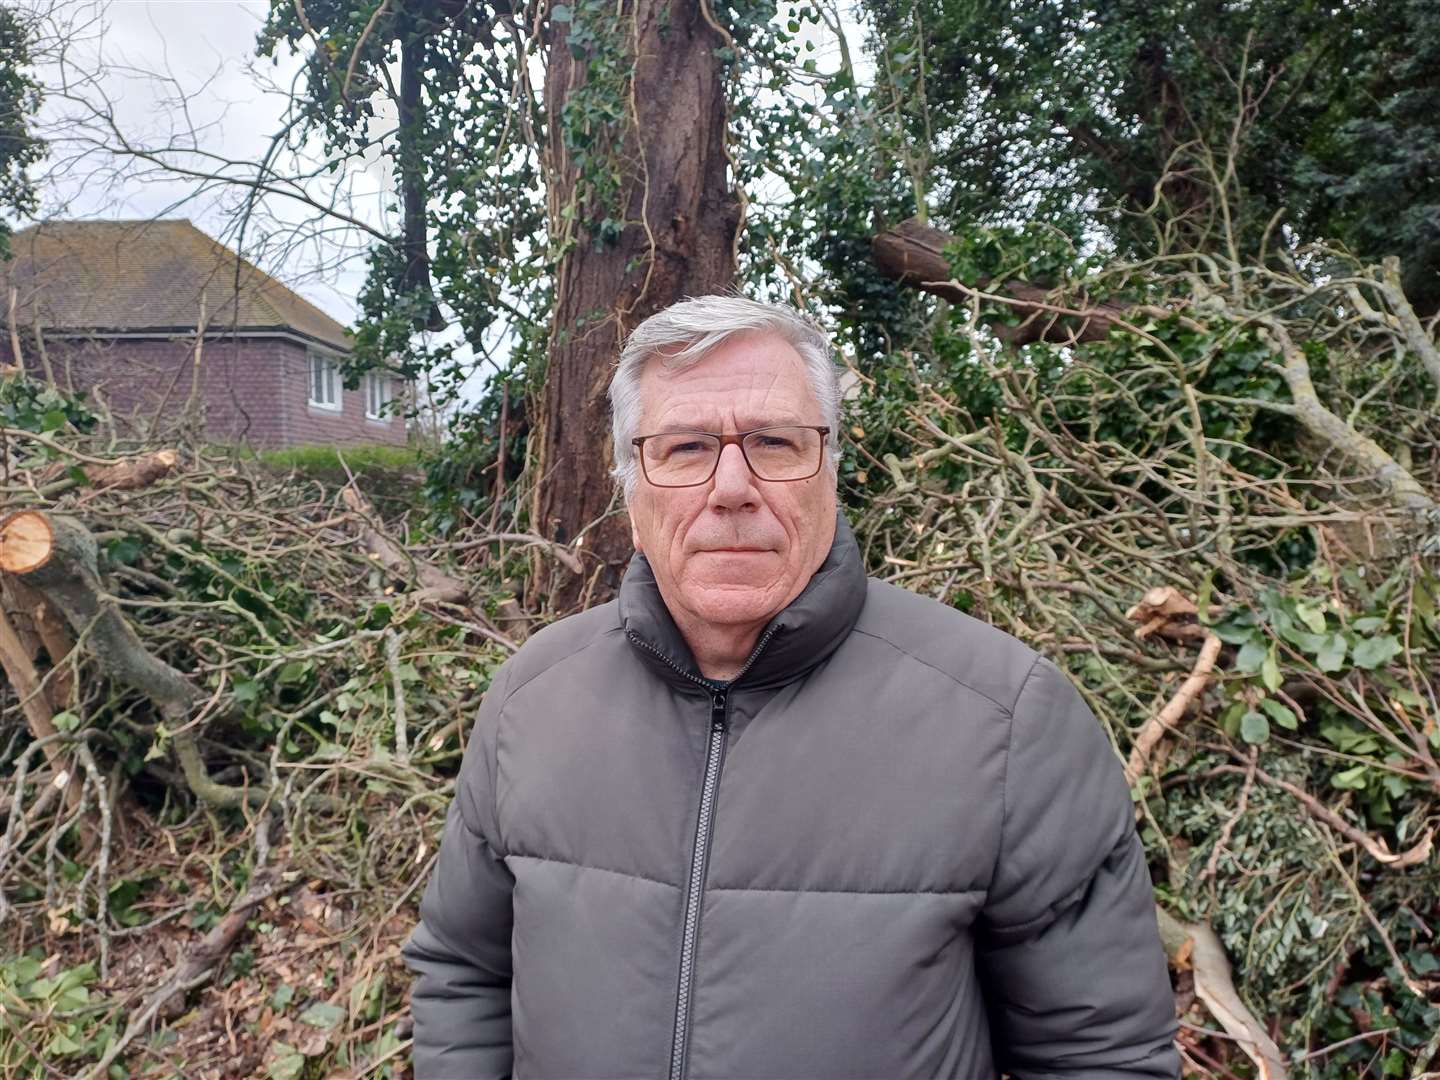 Gary Jackman reported the tree in August 2021 to Medway Council